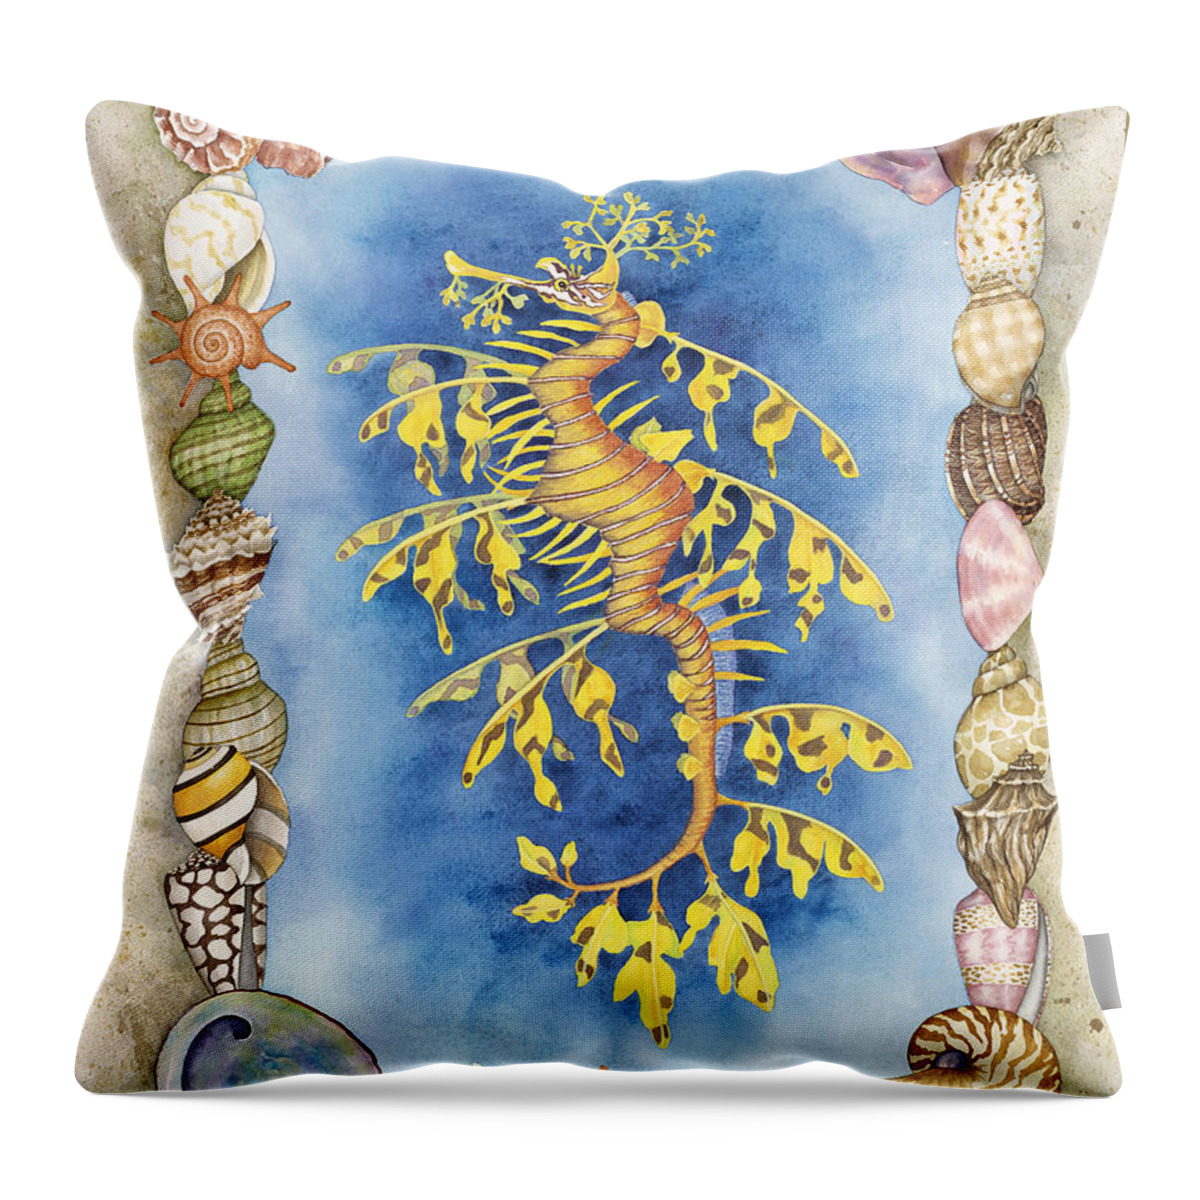 Leafy Sea Dragon Throw Pillow featuring the painting Leafy Sea Dragon by Lucy Arnold